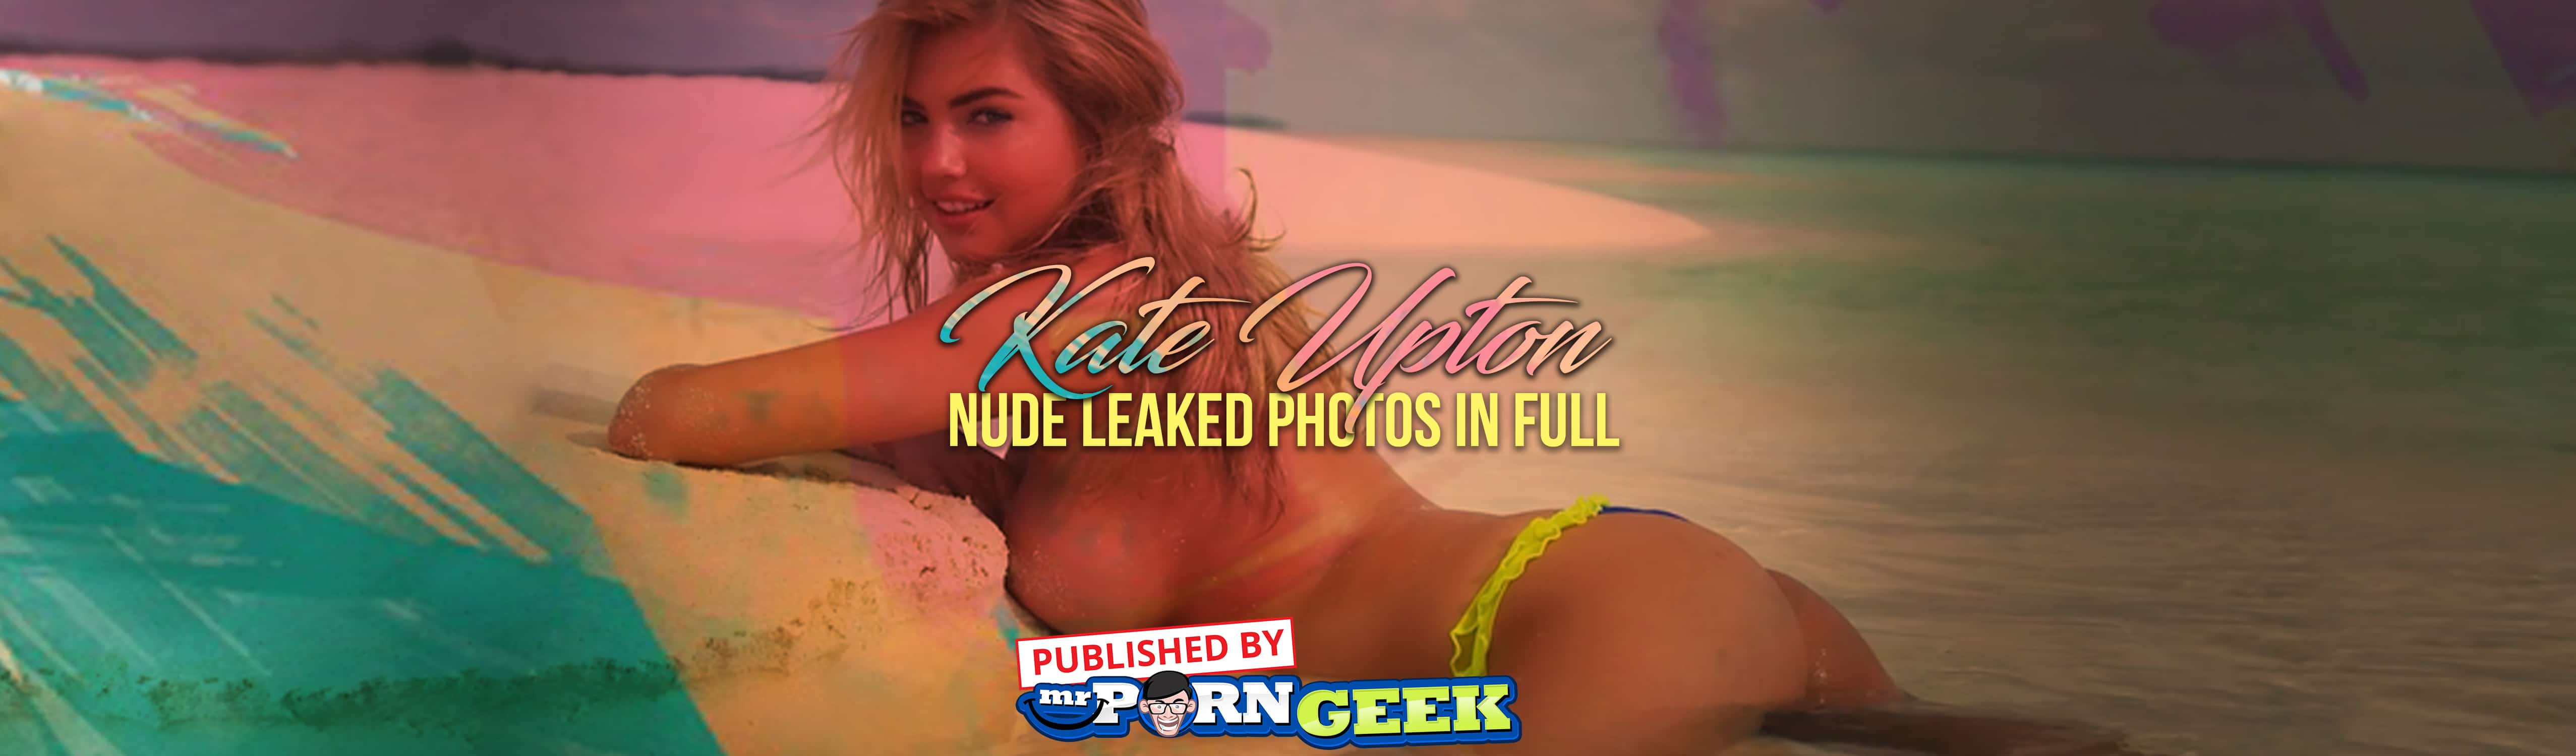 Sex In Zip File - Kate Upton: Nude Leaked Photos in Full (2019 Sex Tape & XXX Video)